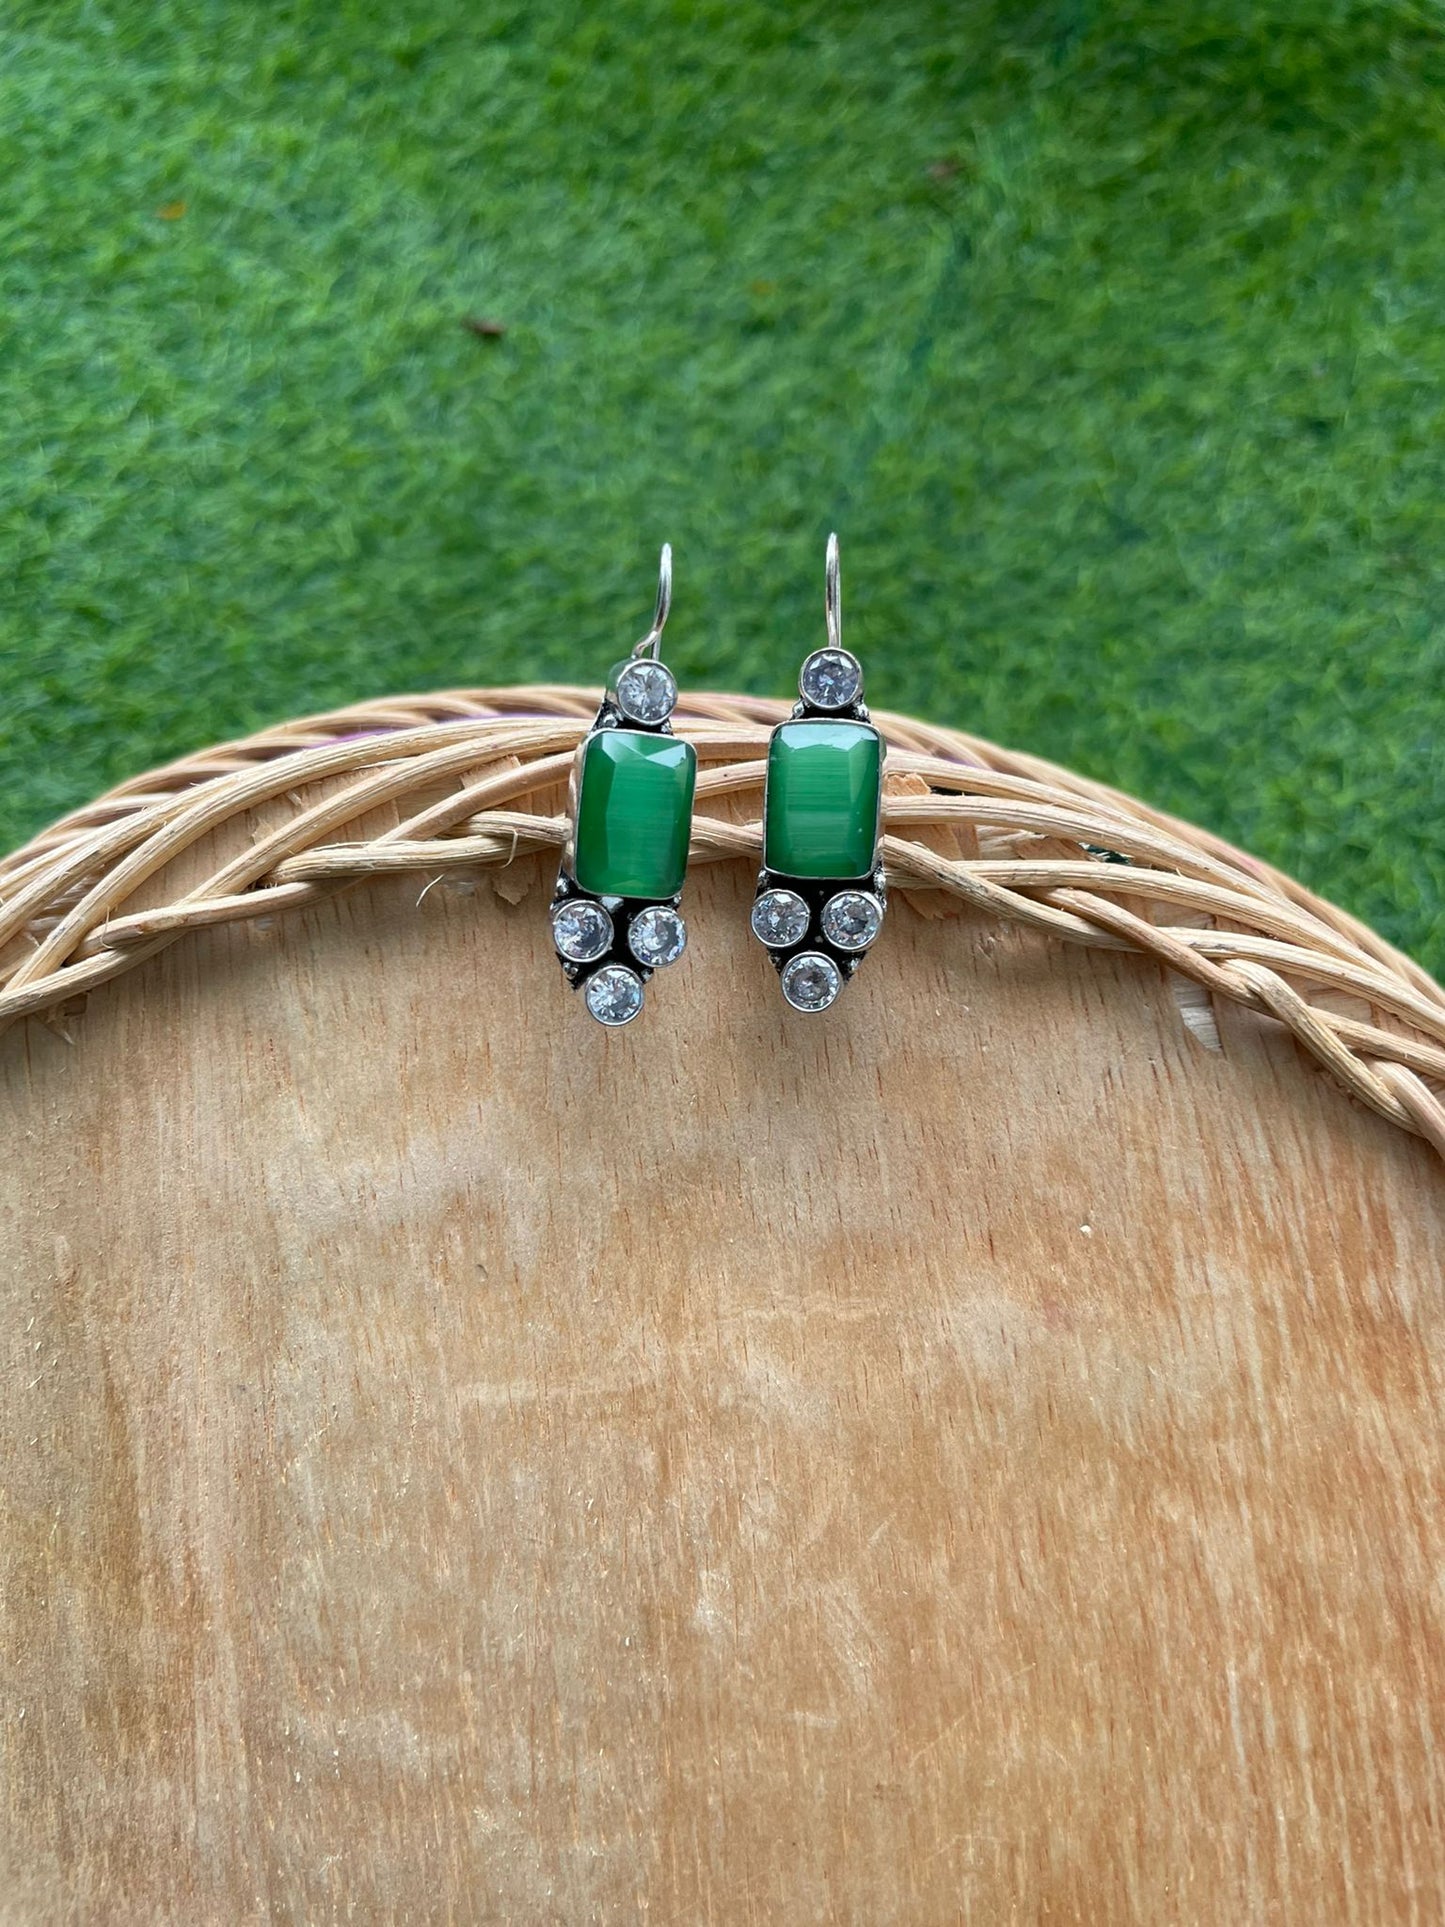 Green stone in metal structure earrings new design